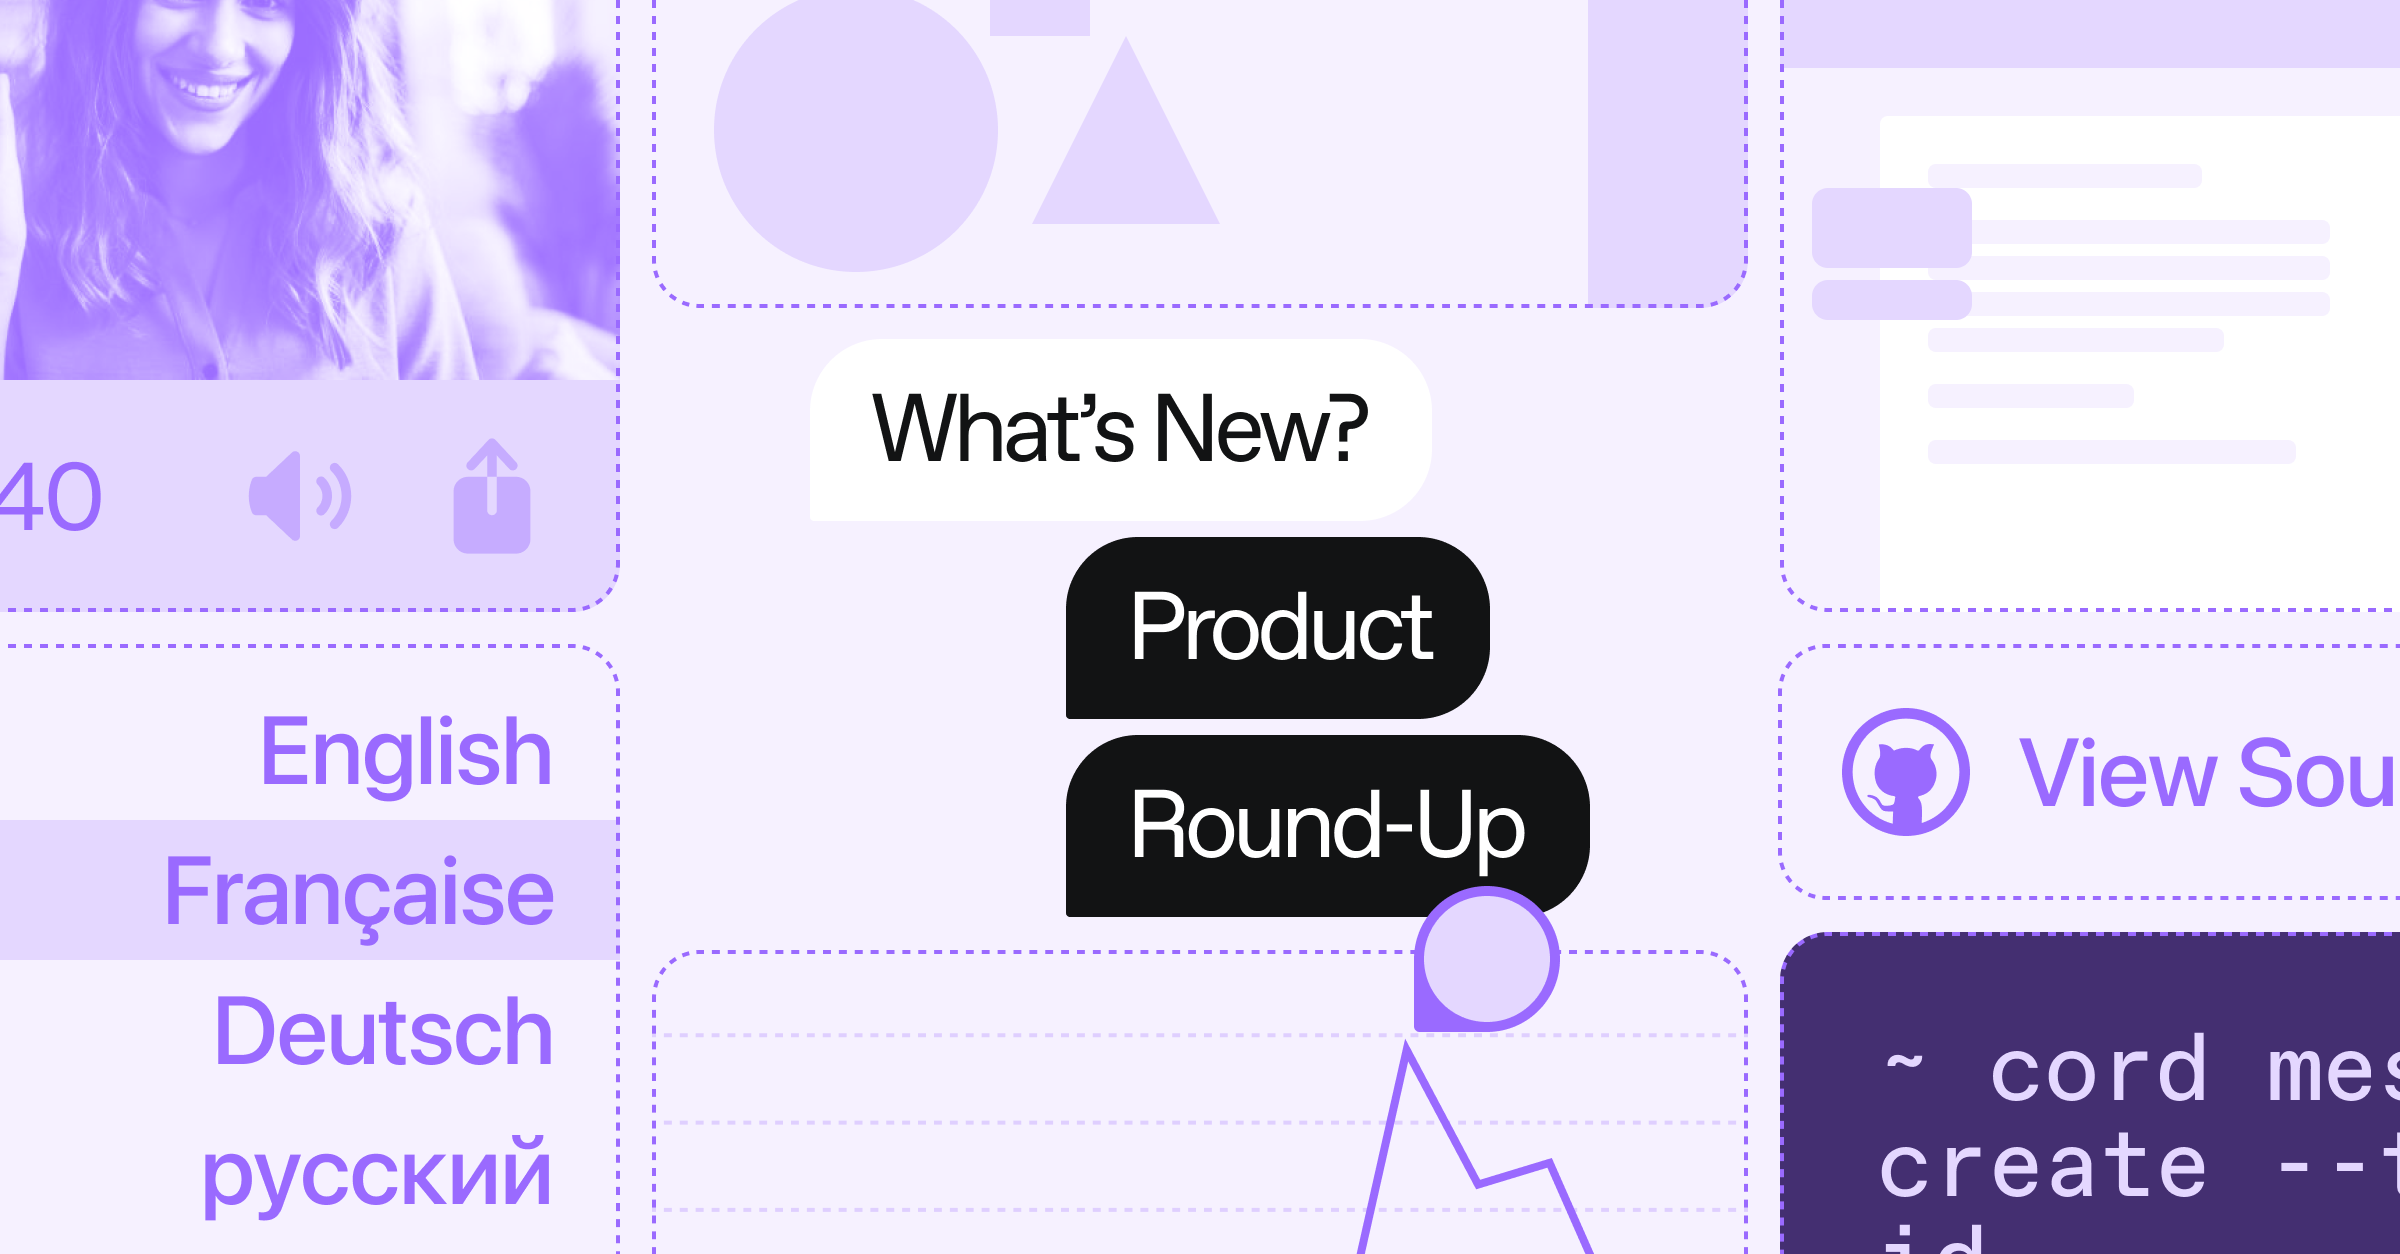 A graphic showing chat messages with reactions and the text "What's New? Product Round-Up"